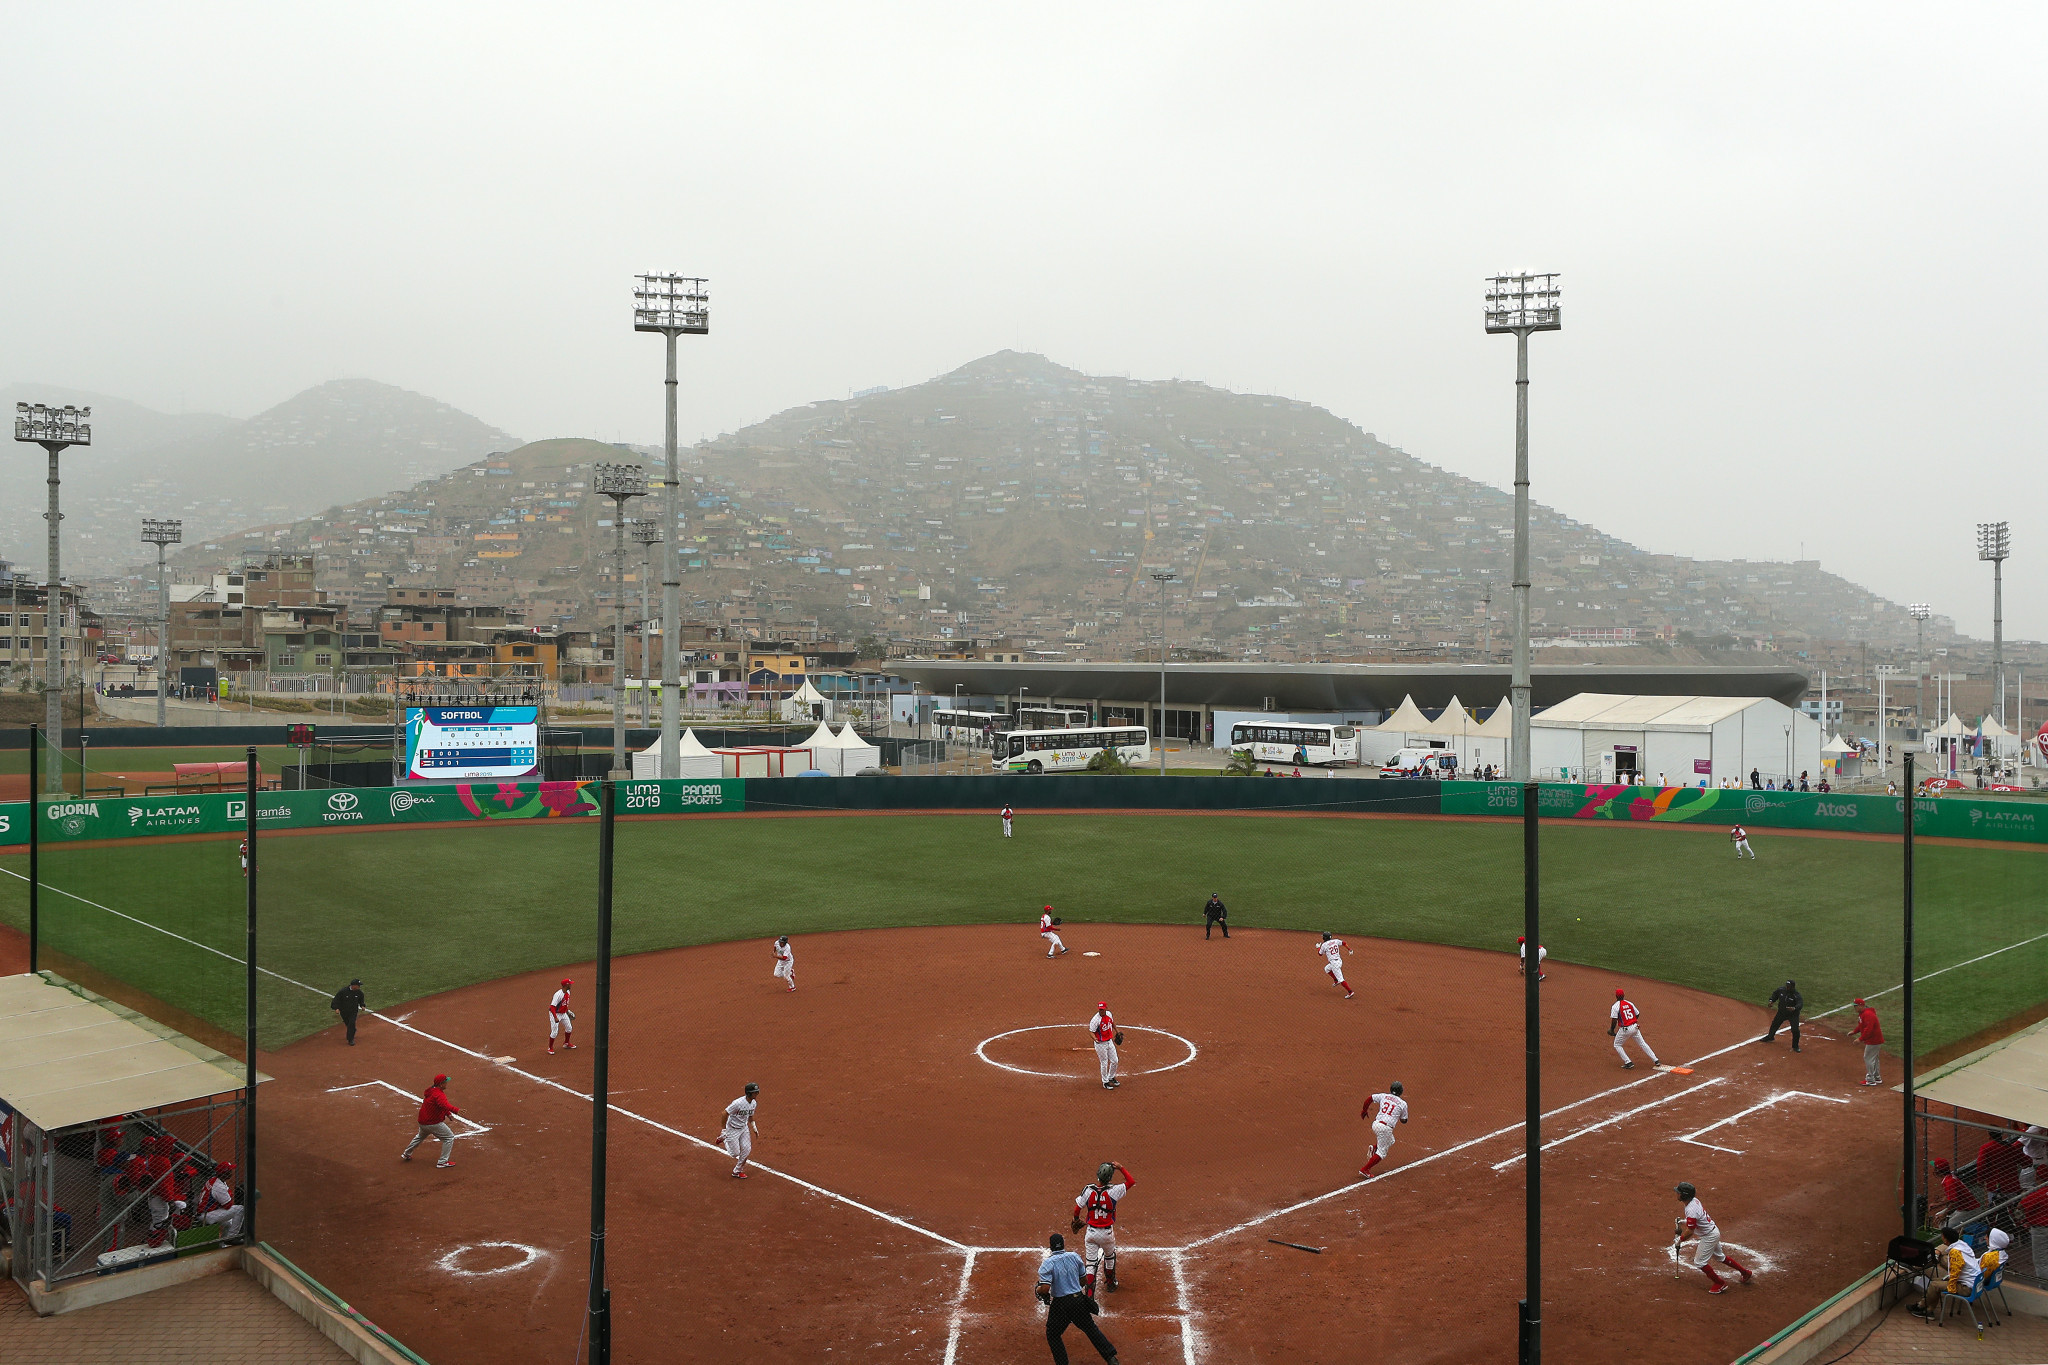 The softball field at the Villa Maria del Triunfo complex in Lima staged matches at the 2019 Pan American Games ©WBSC